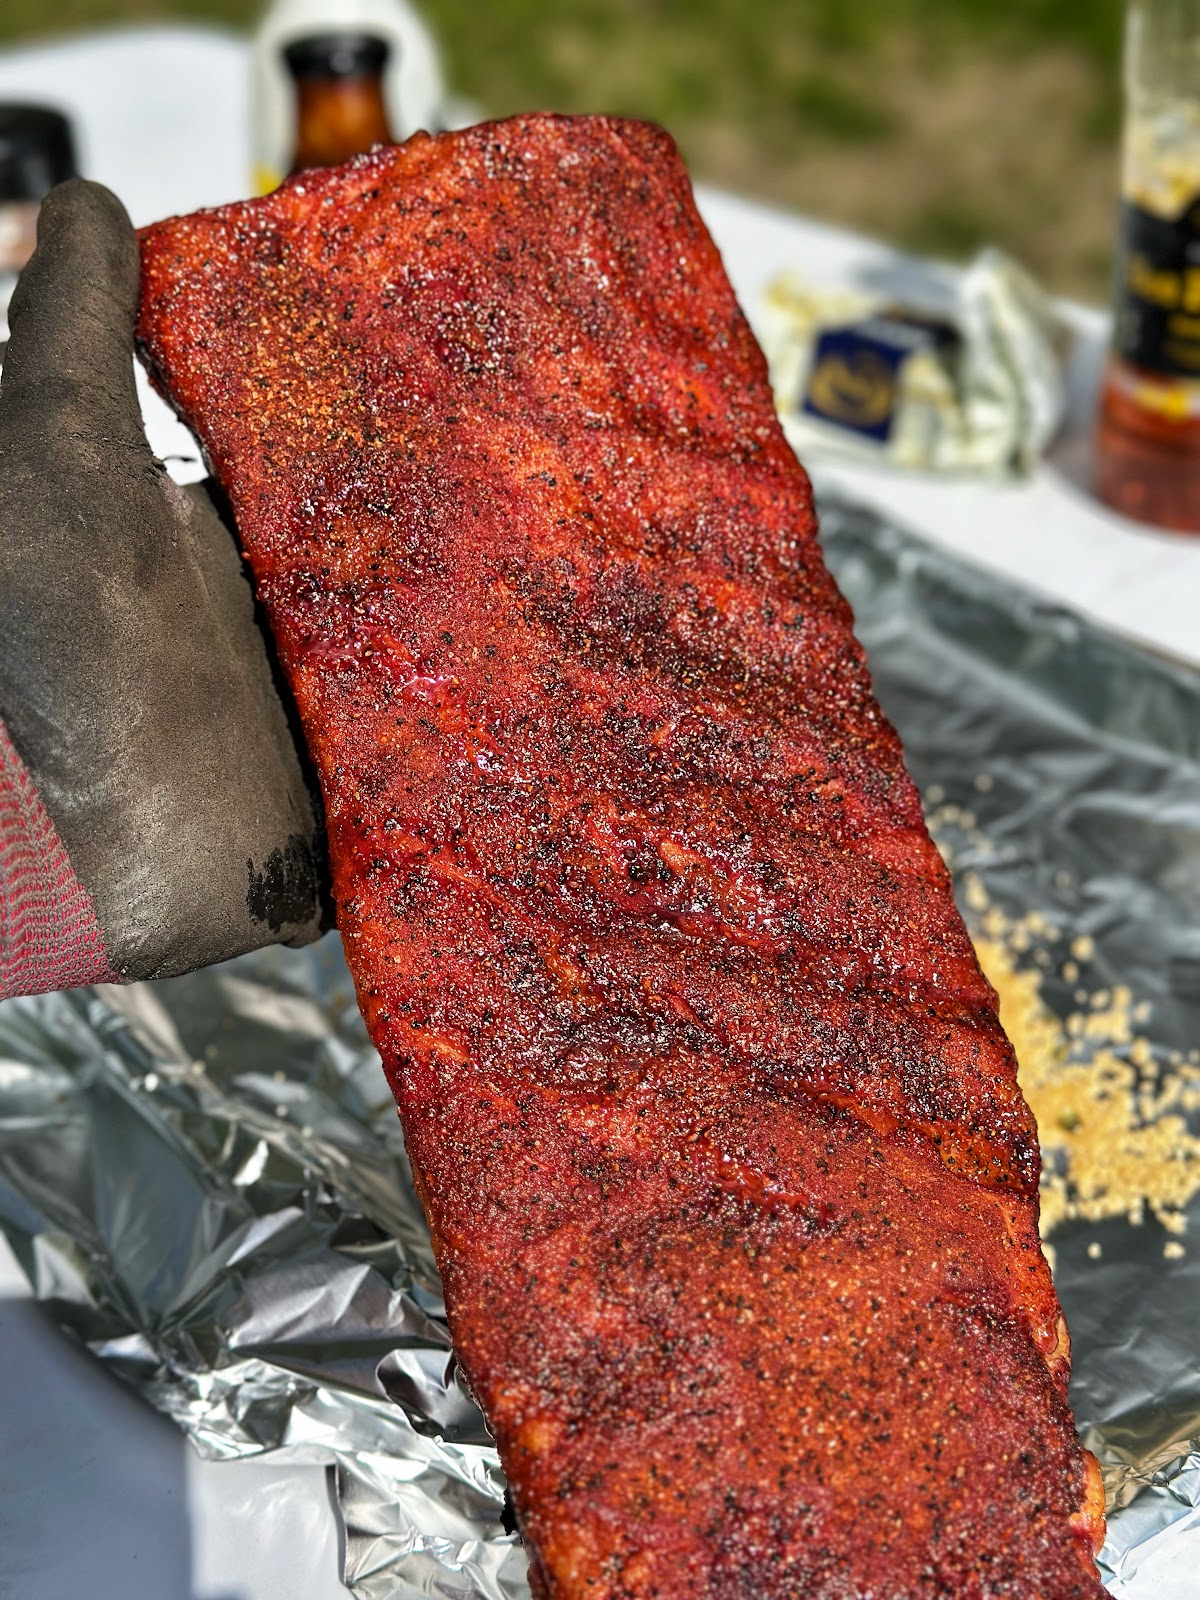 St Louis-style ribs